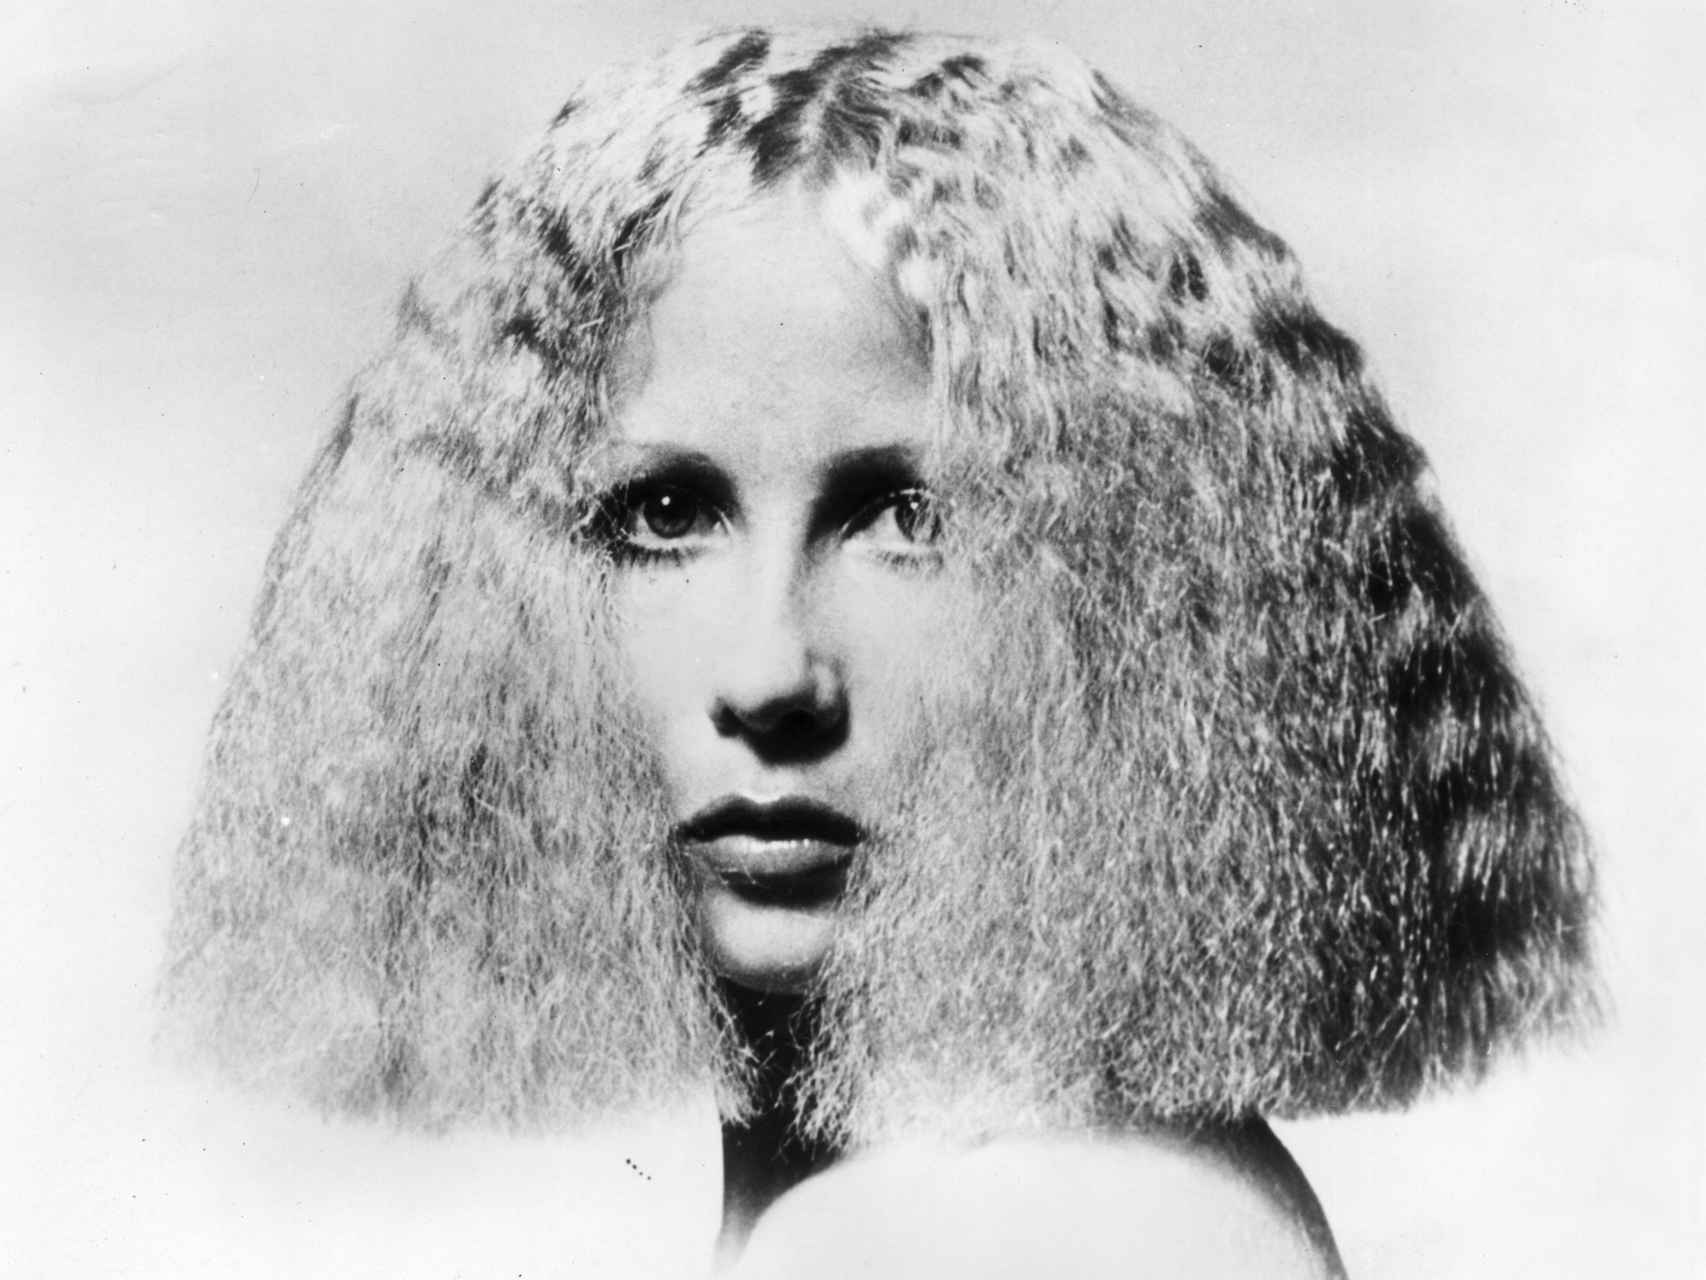 El 'ultra-frizzy' look. Getty Images